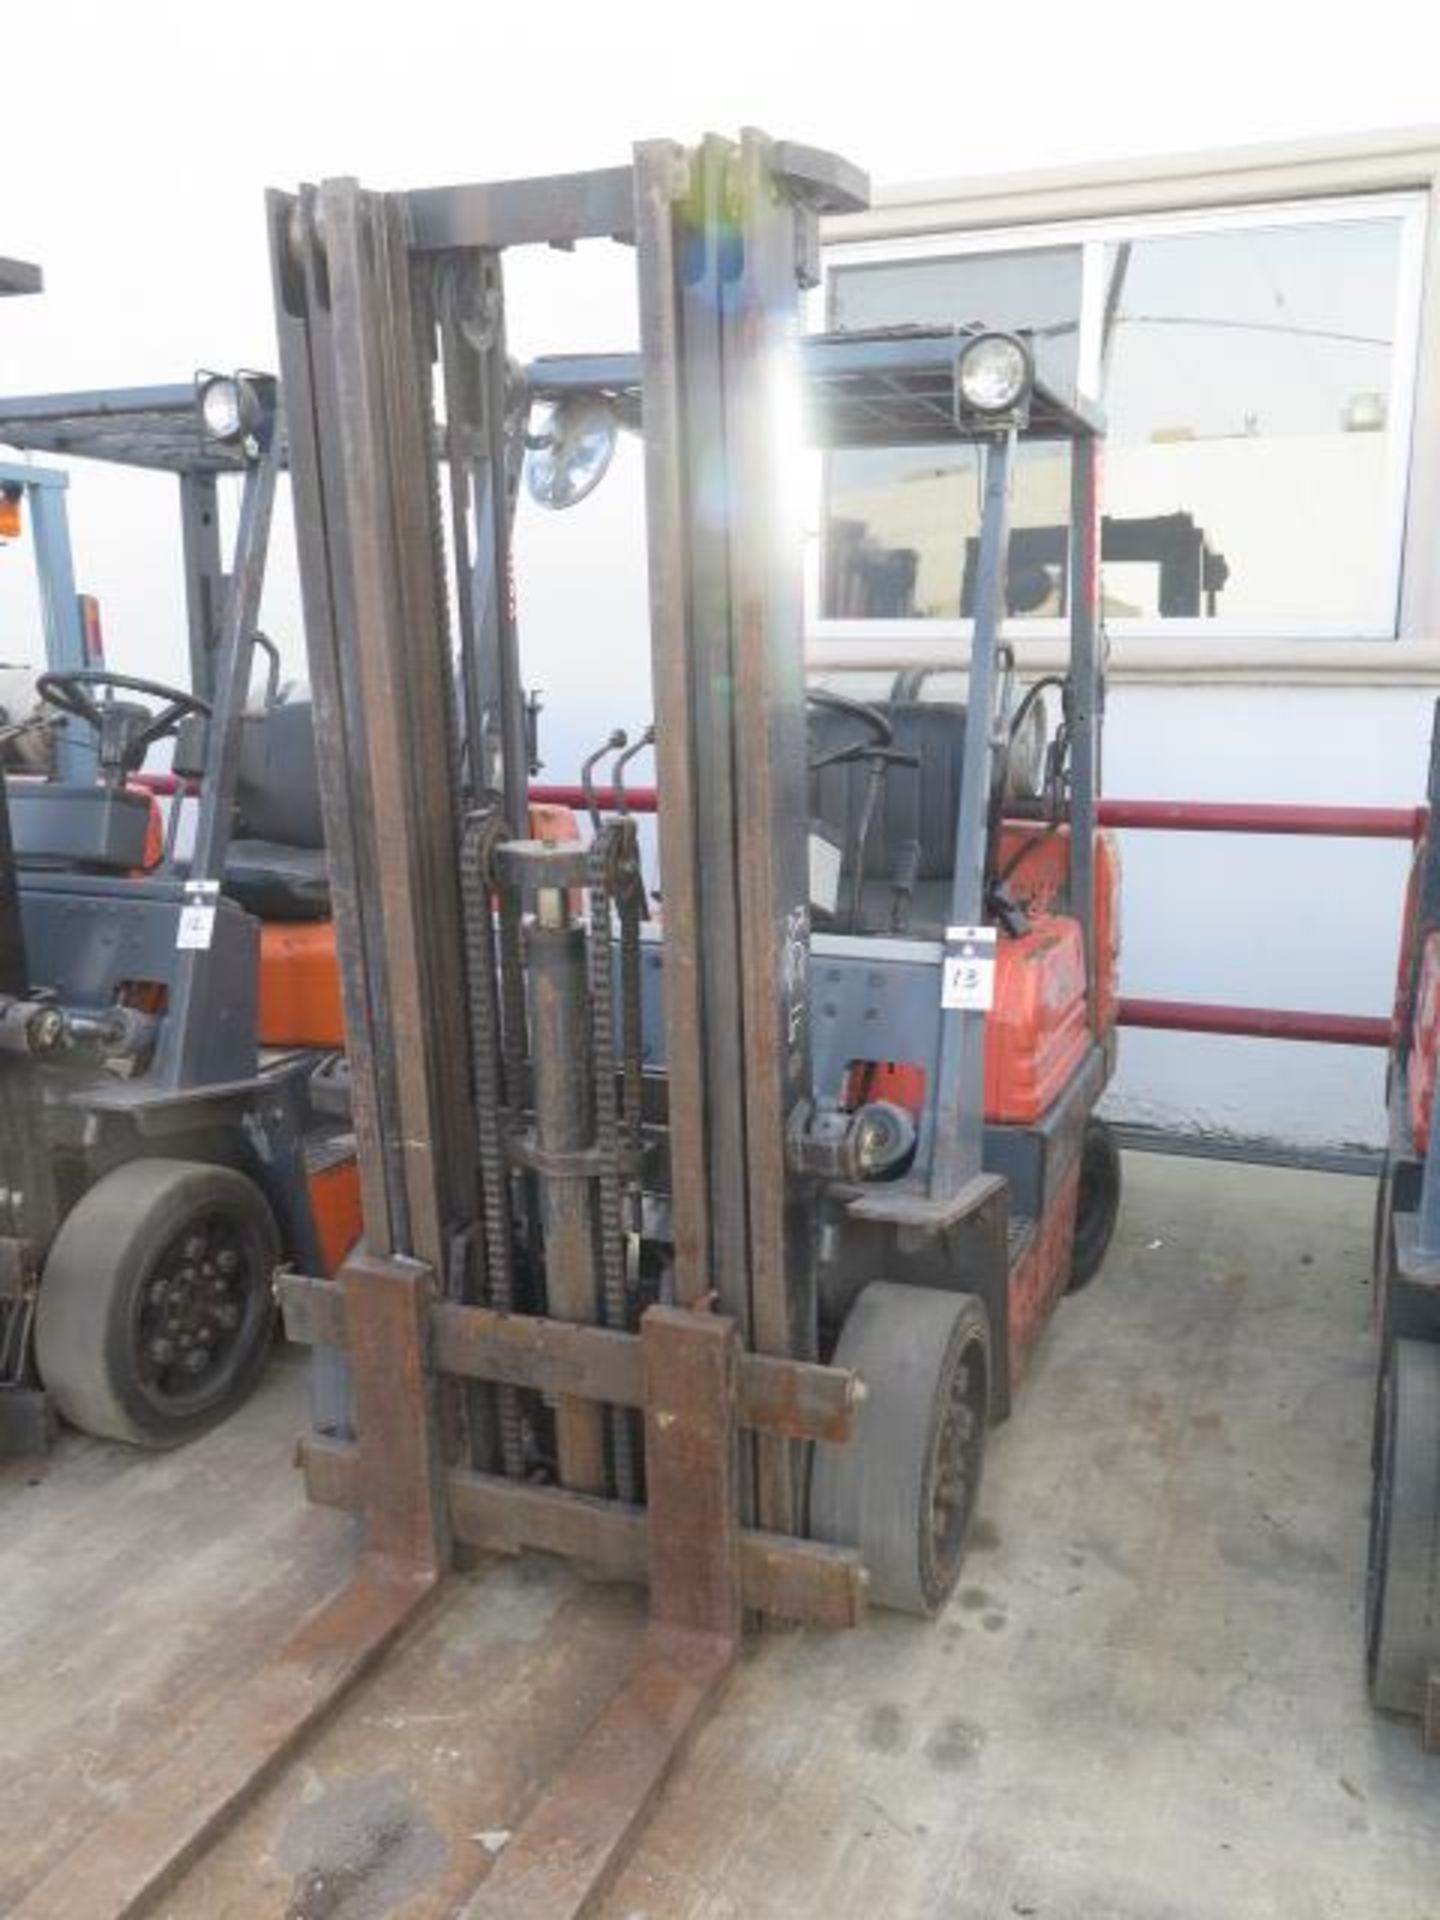 Toyota 5FGC25 5000 Lb Cap LPG Forklift s/n 85256 w/ 3-Stage Mast, 185" Lift Height, Cushion Tires,